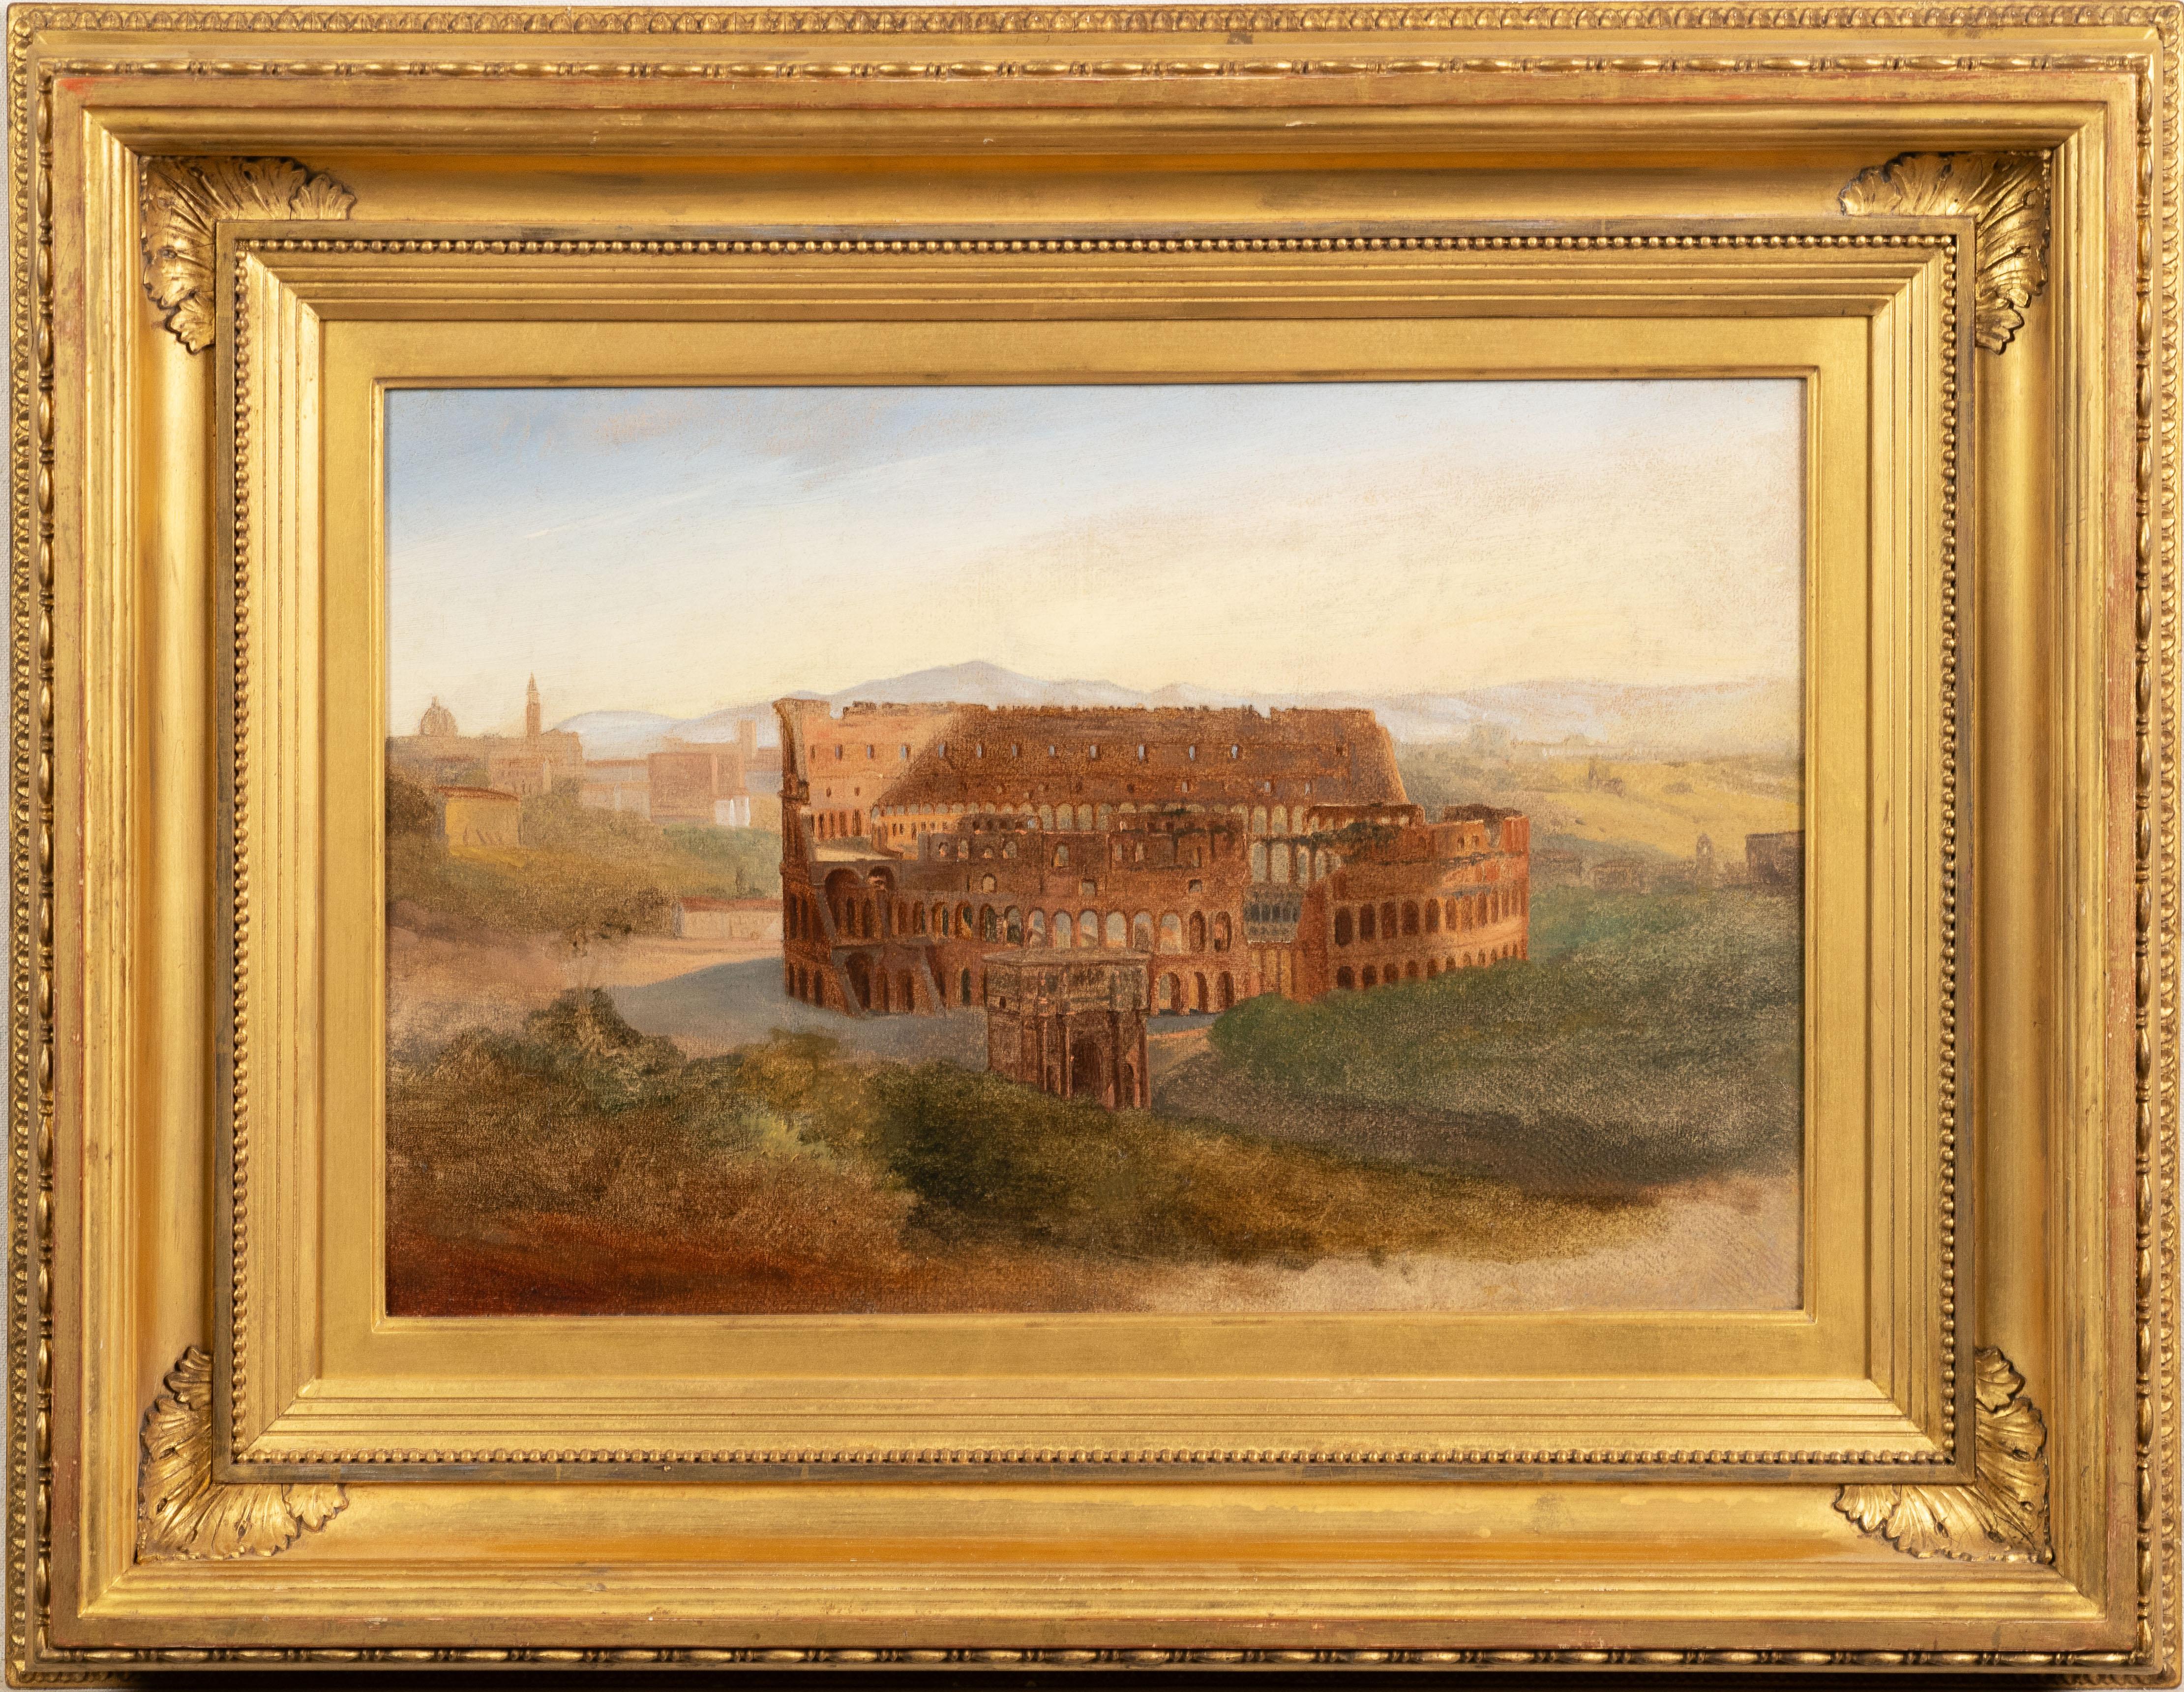 Antique American Hudson River School artist working in Italy.  Oil on canvas.  Framed nicely.  No signature found. 